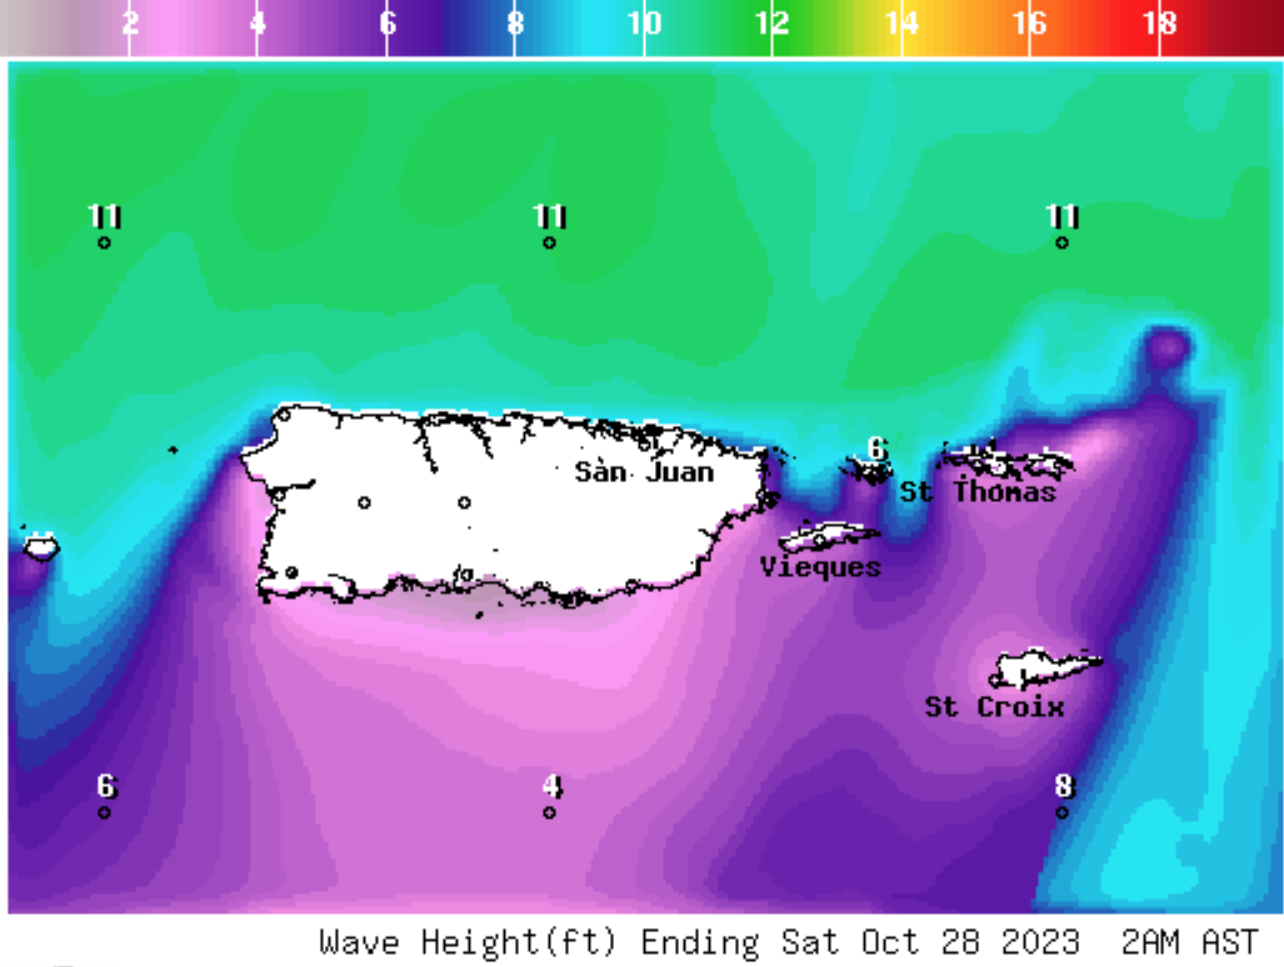 Wave height forecast for 2 a.m. AST on Saturday, Oct. 28, from the National Weather Service in San Juan, Puerto Rico. Marine weather alerts have been issued for areas of Puerto Rico and the USVI. (Image courtesy of National Weather Service, San Juan, PR official website.)